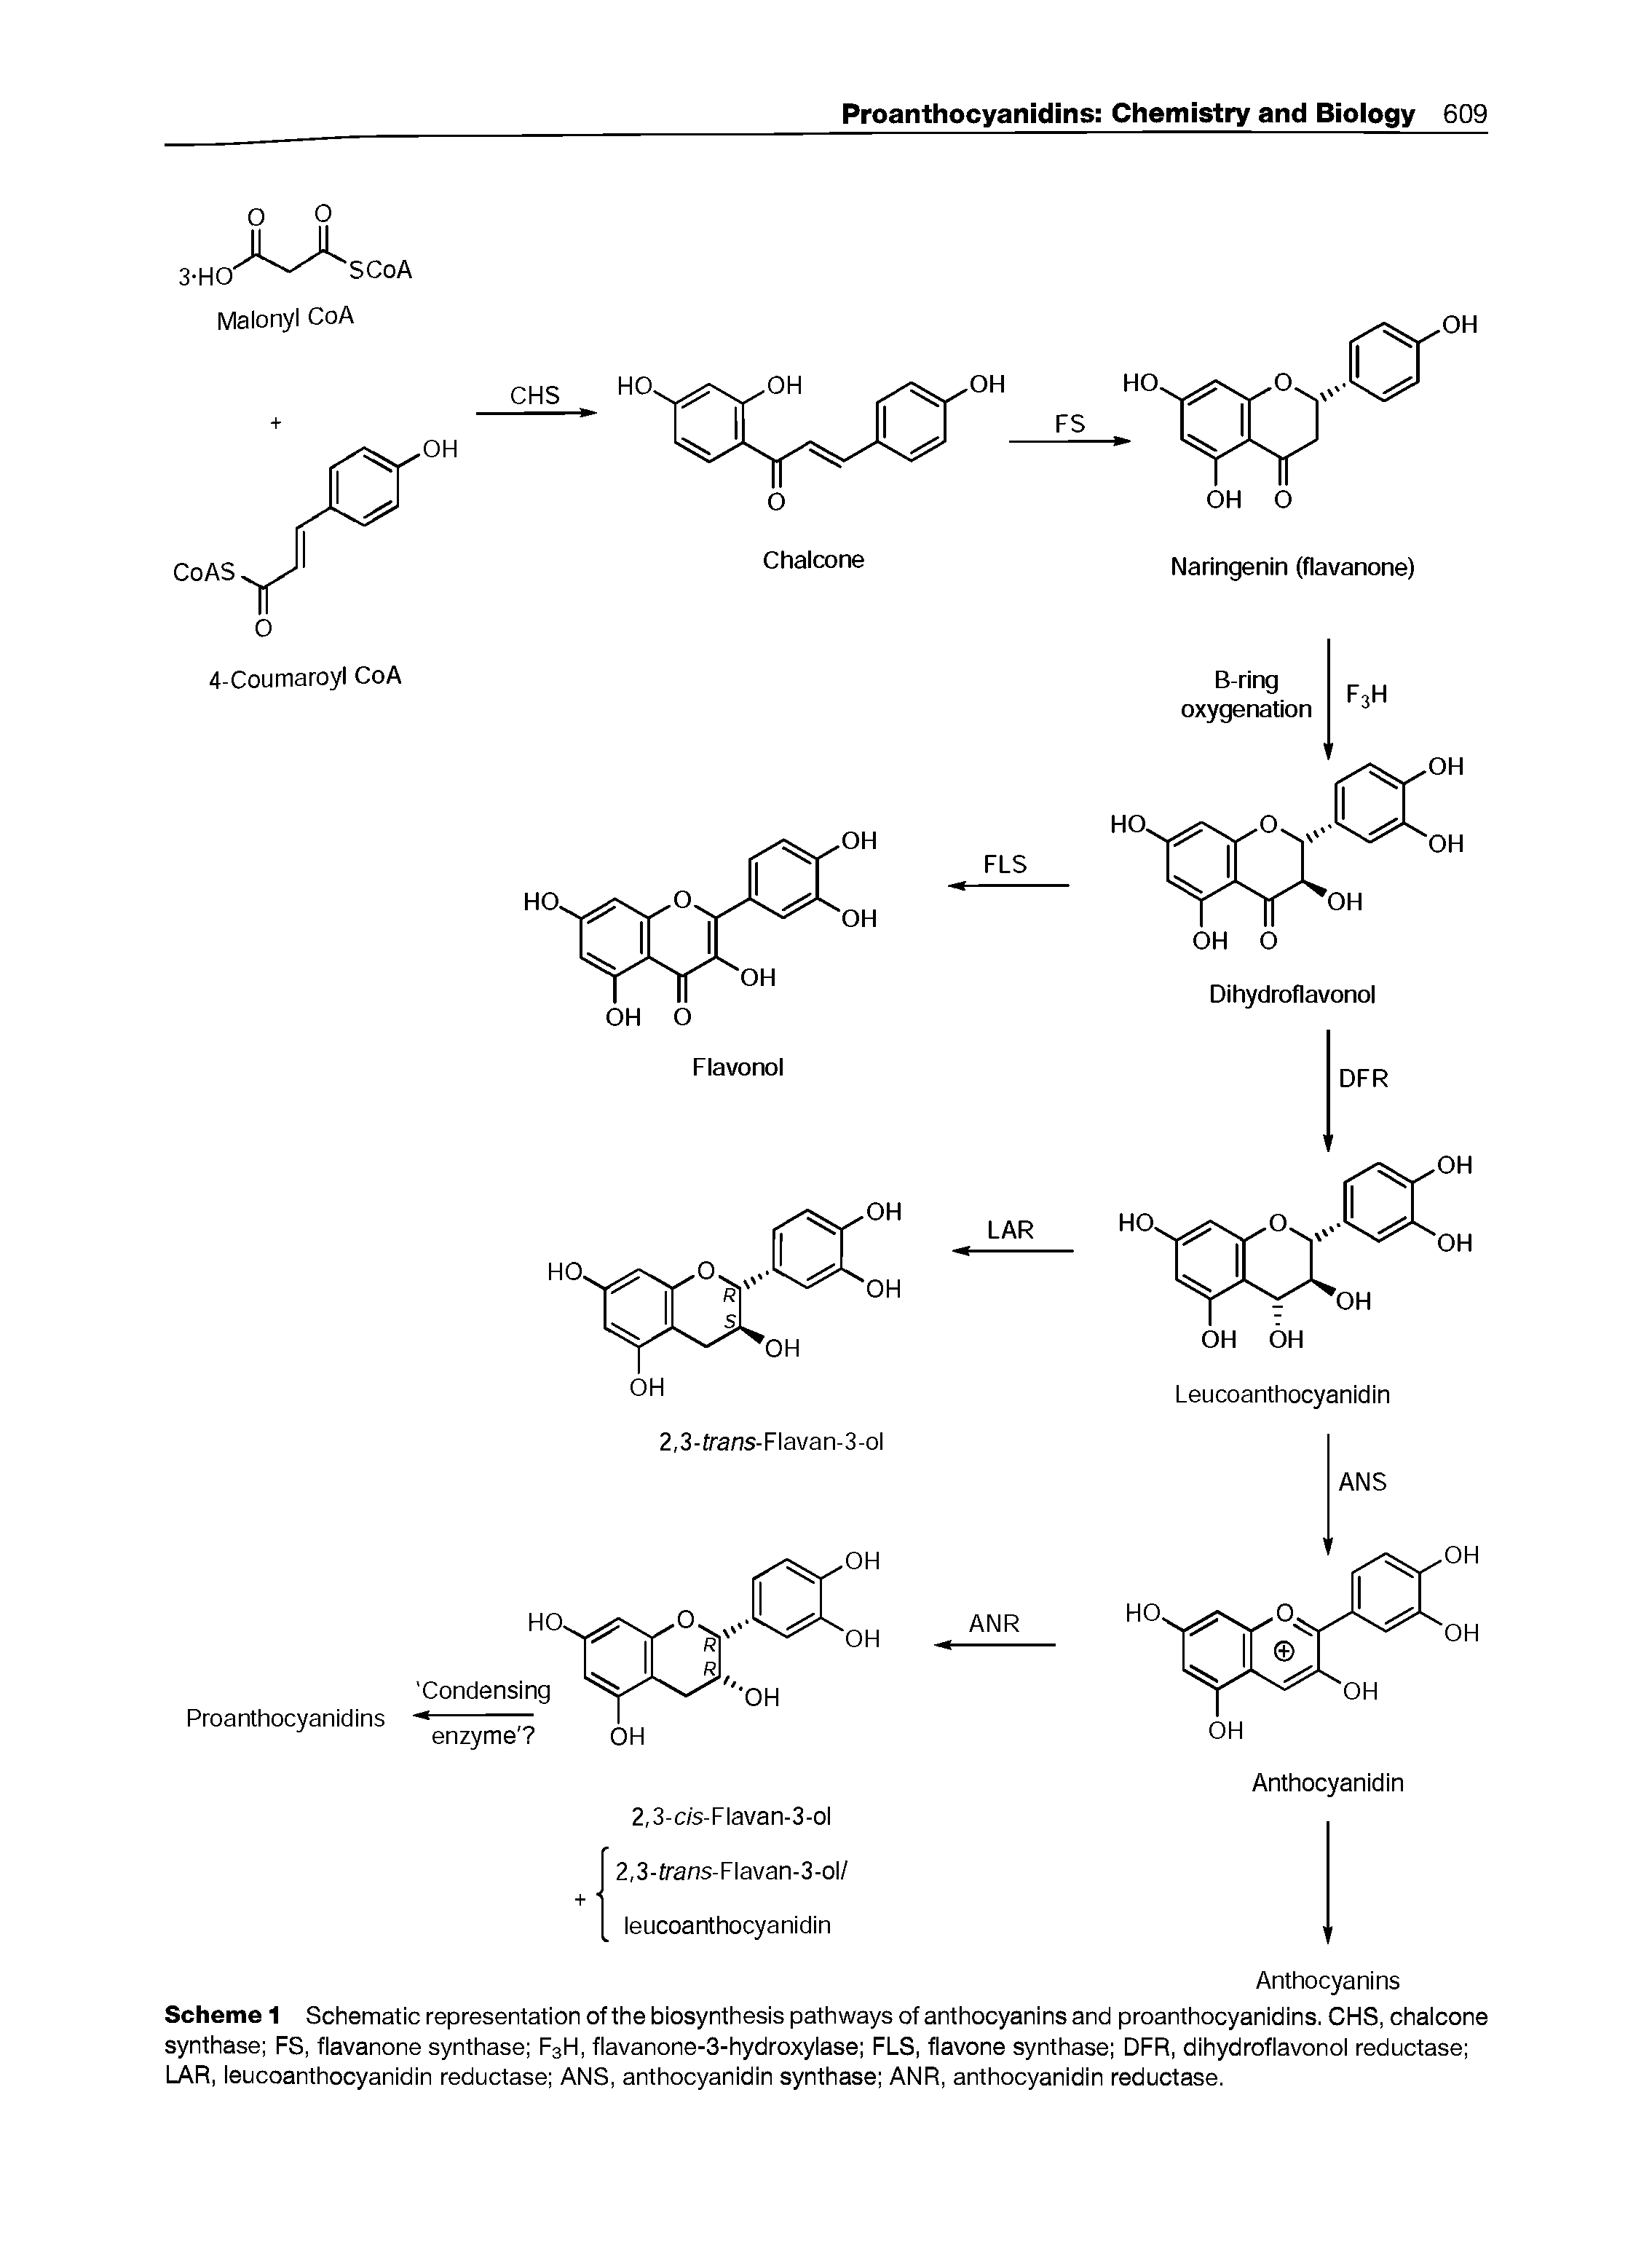 Scheme 1 Schematic representation ofthe biosynthesis pathways of anthocyanins and proanthocyanidins. CHS, chalcone synthase FS, flavanone synthase F3H, flavanone-3-hydroxylase FLS, flavone synthase DFR, dihydroflavonol reductase LAR, leucoanthocyanidin reductase ANS, anthocyanidin synthase ANR, anthocyanidin reductase.